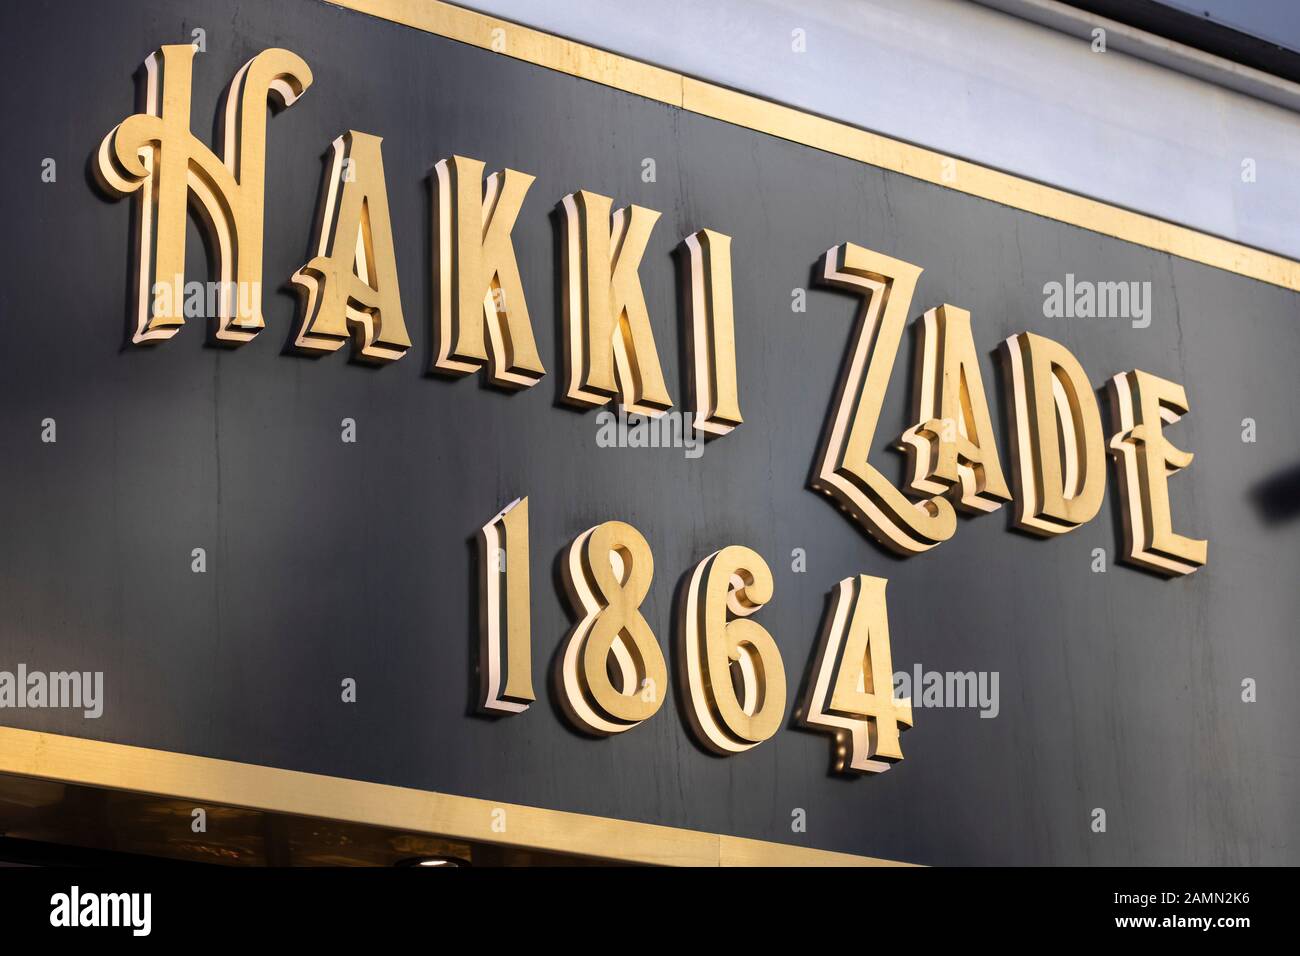 Hakki Zade was established in 1864 as a confectioner. Hakki Zade sign photographed nearby. Gold color on black surface. Stock Photo